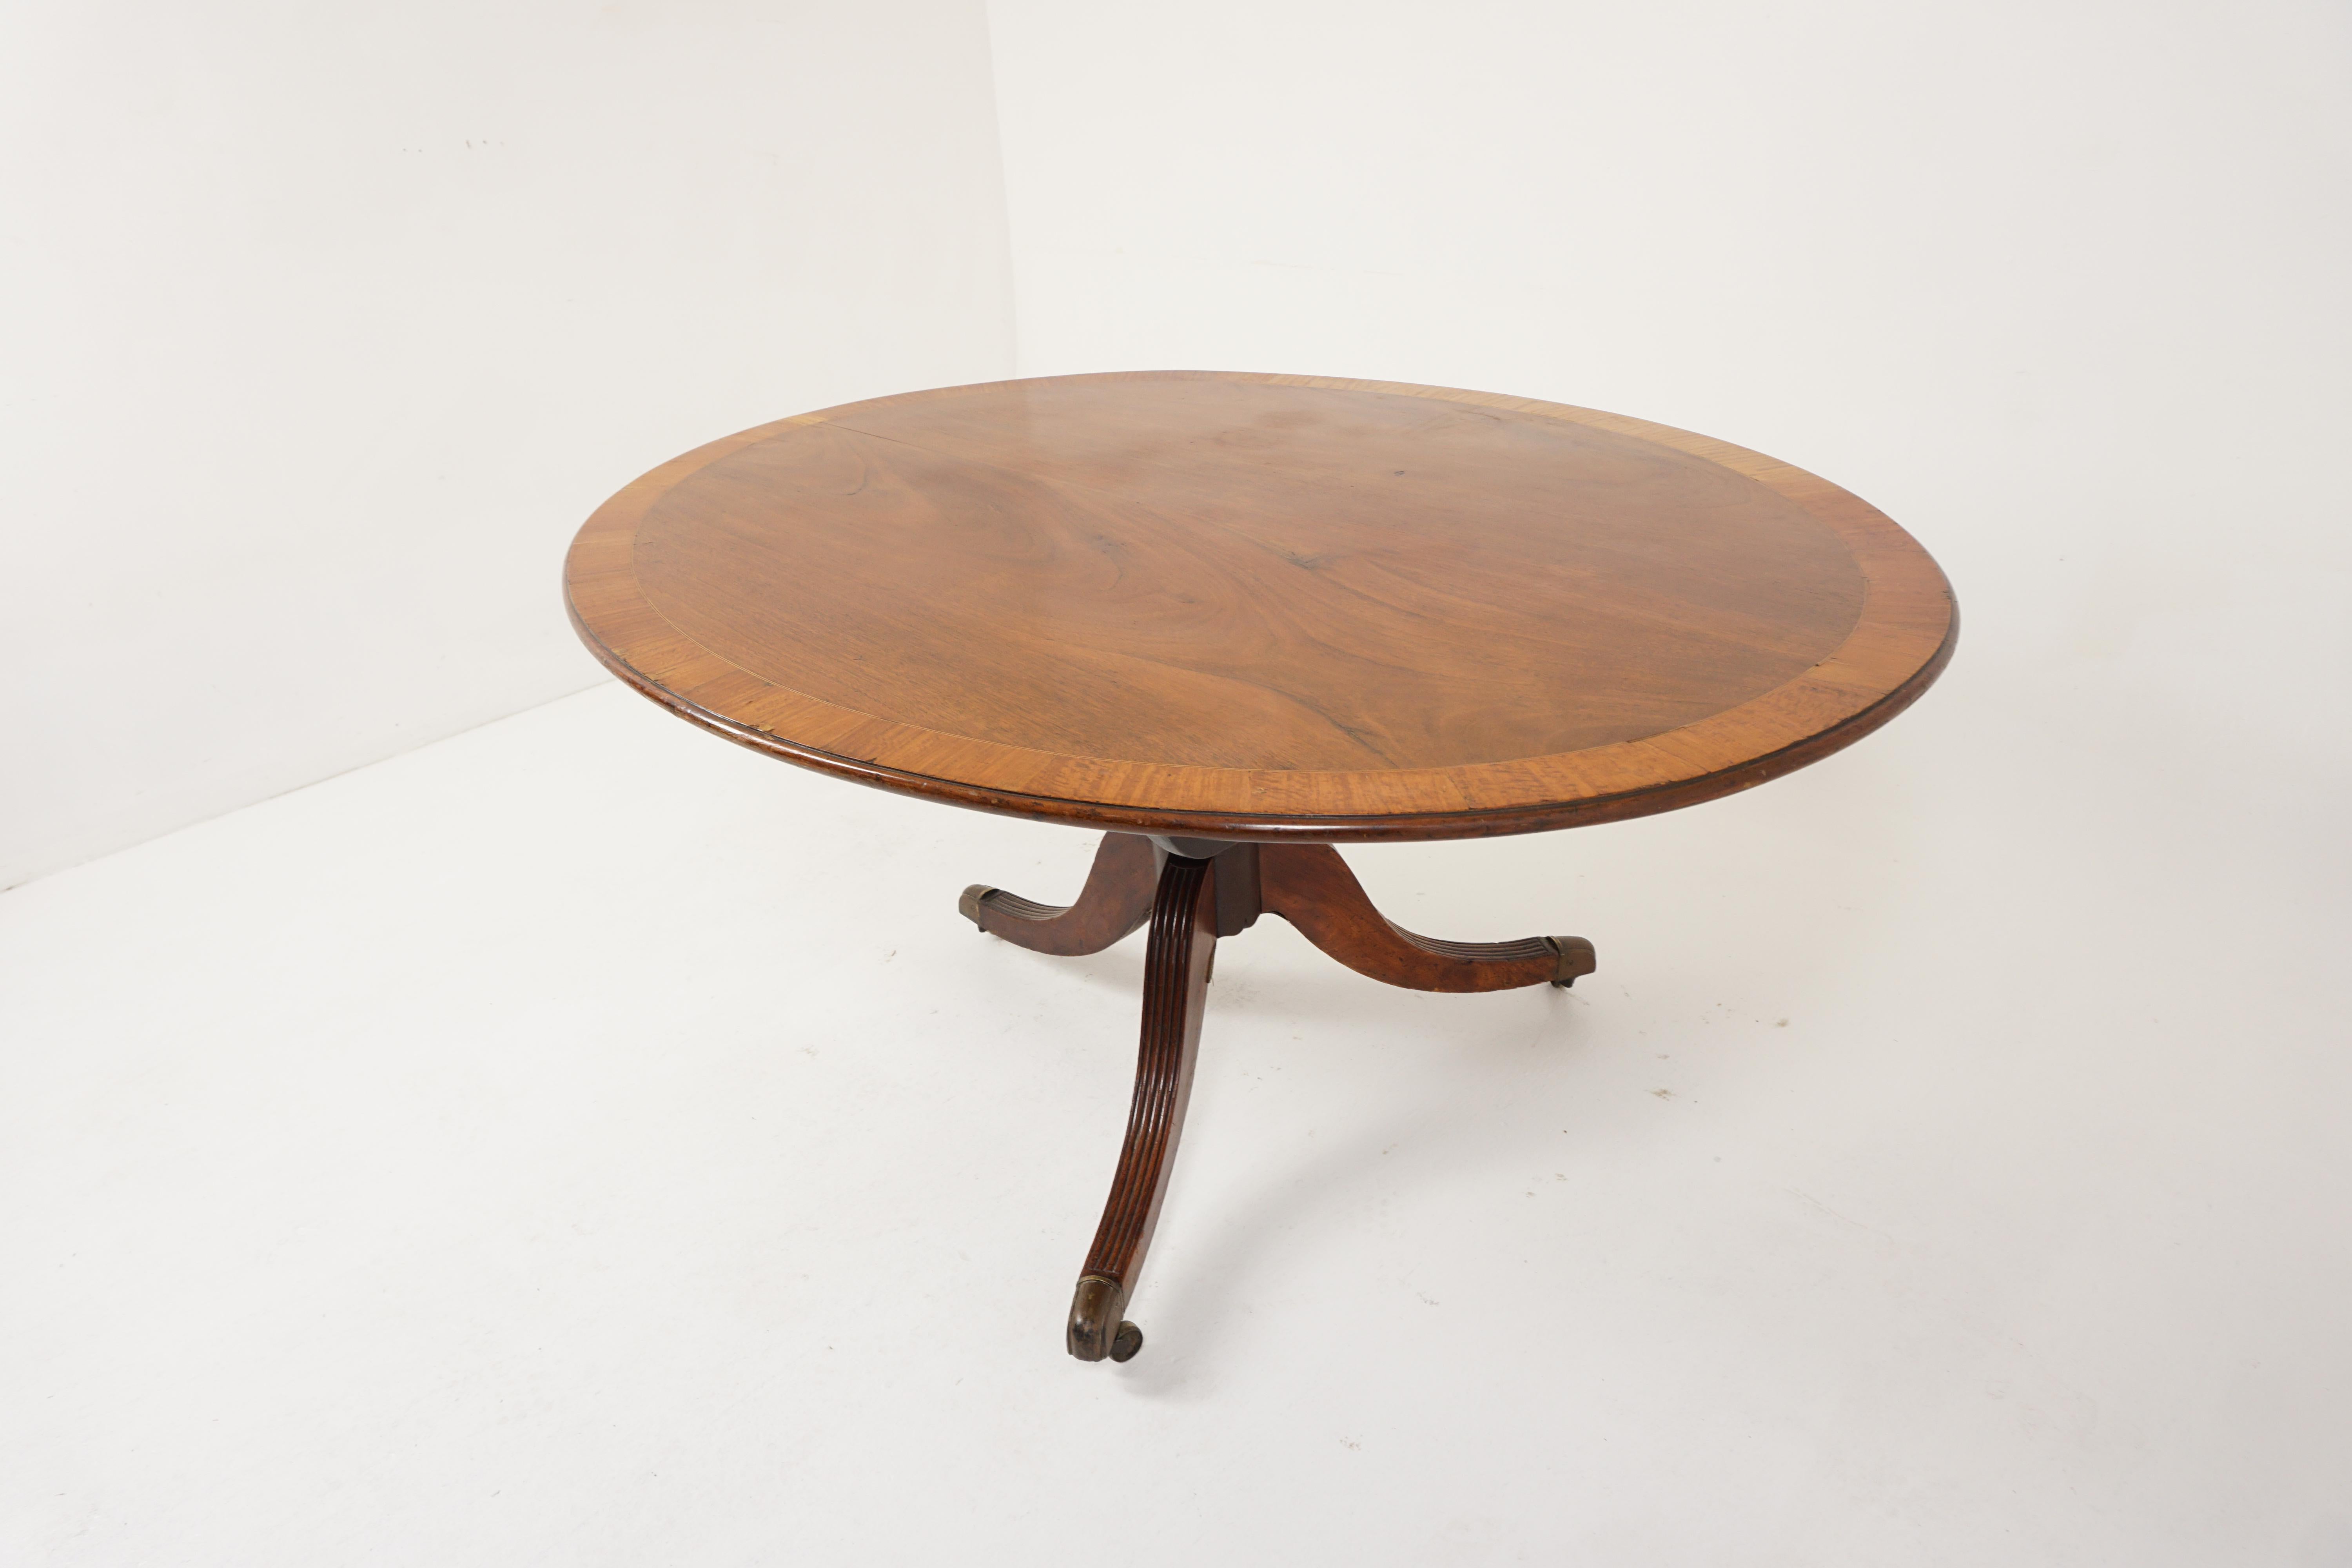 Antique Edwardian tripod walnut inlaid oval tilt top table, Scotland 1900, H230

Scotland 1900
Solid walnut and veneeroOriginal finish
The well figured top with a wide band of satin wood inlay
Moulded edge
Standing on turned pedestal column
On swept